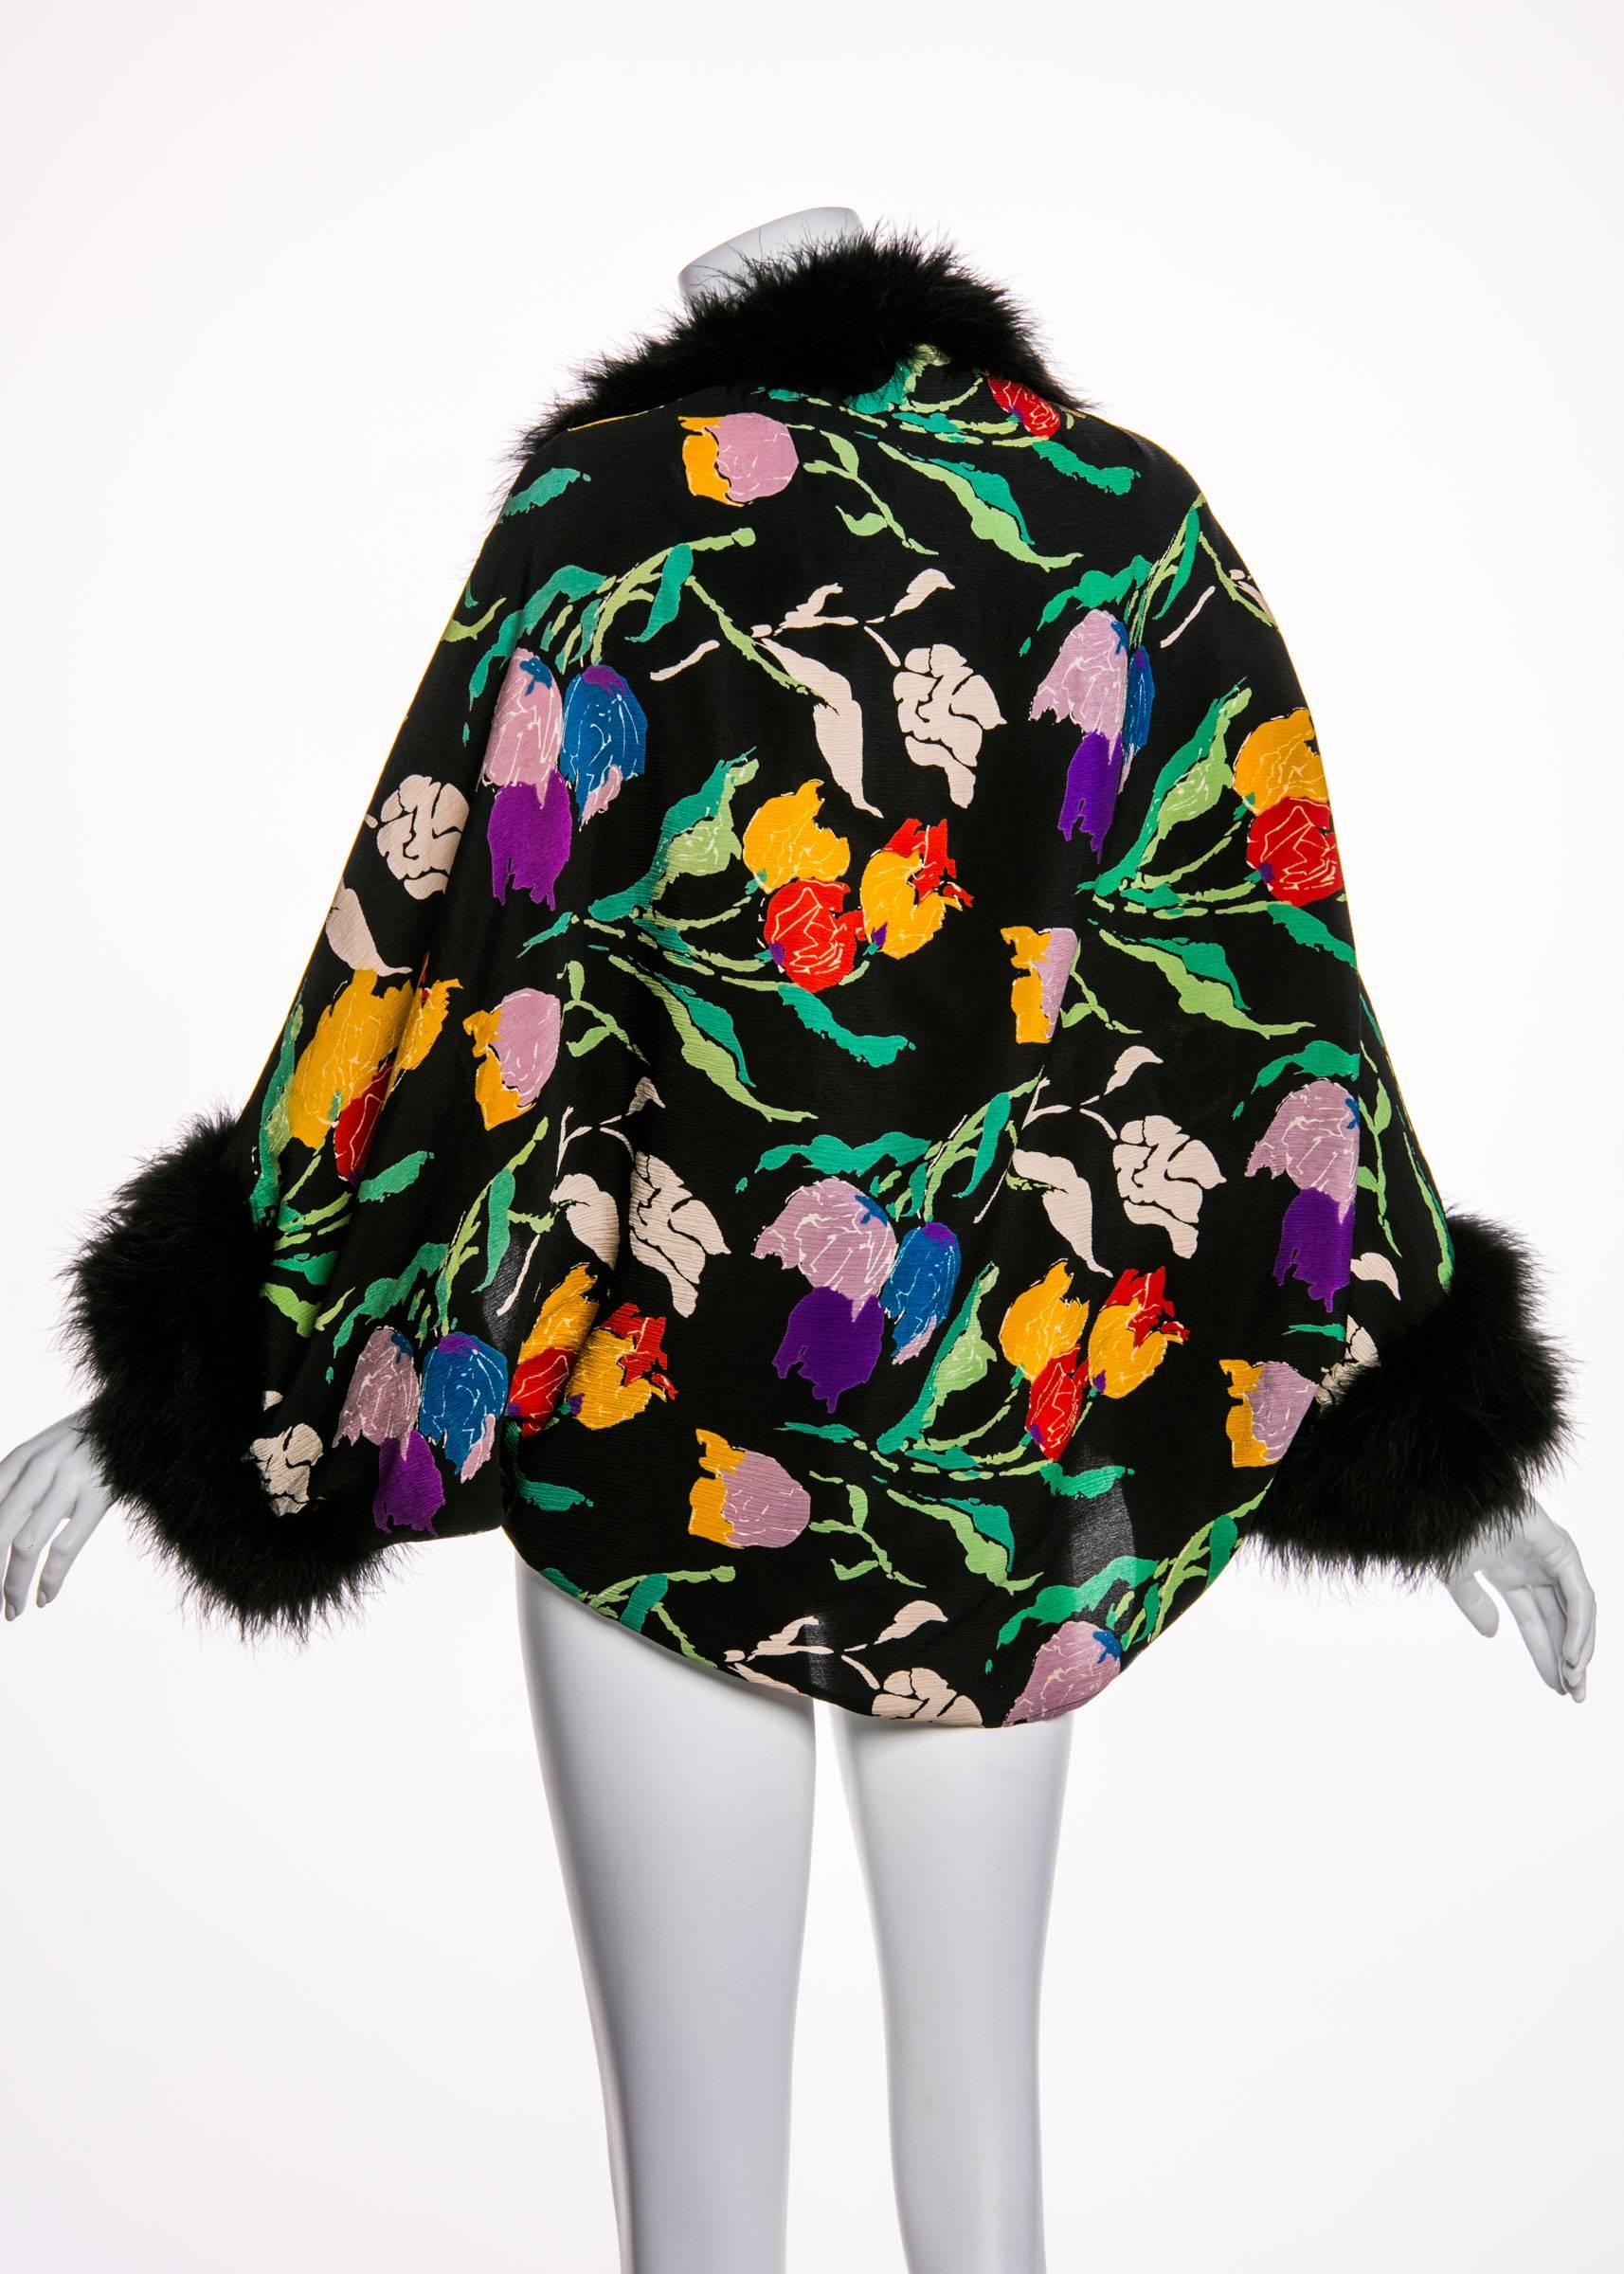 The floral pattern featured on this vintage cocoon jacket echoes the increasing trend for large and abstract prints during the 1930s. While clearly a representation of flowers, petals and leaves are articulated with broken lines and fractured